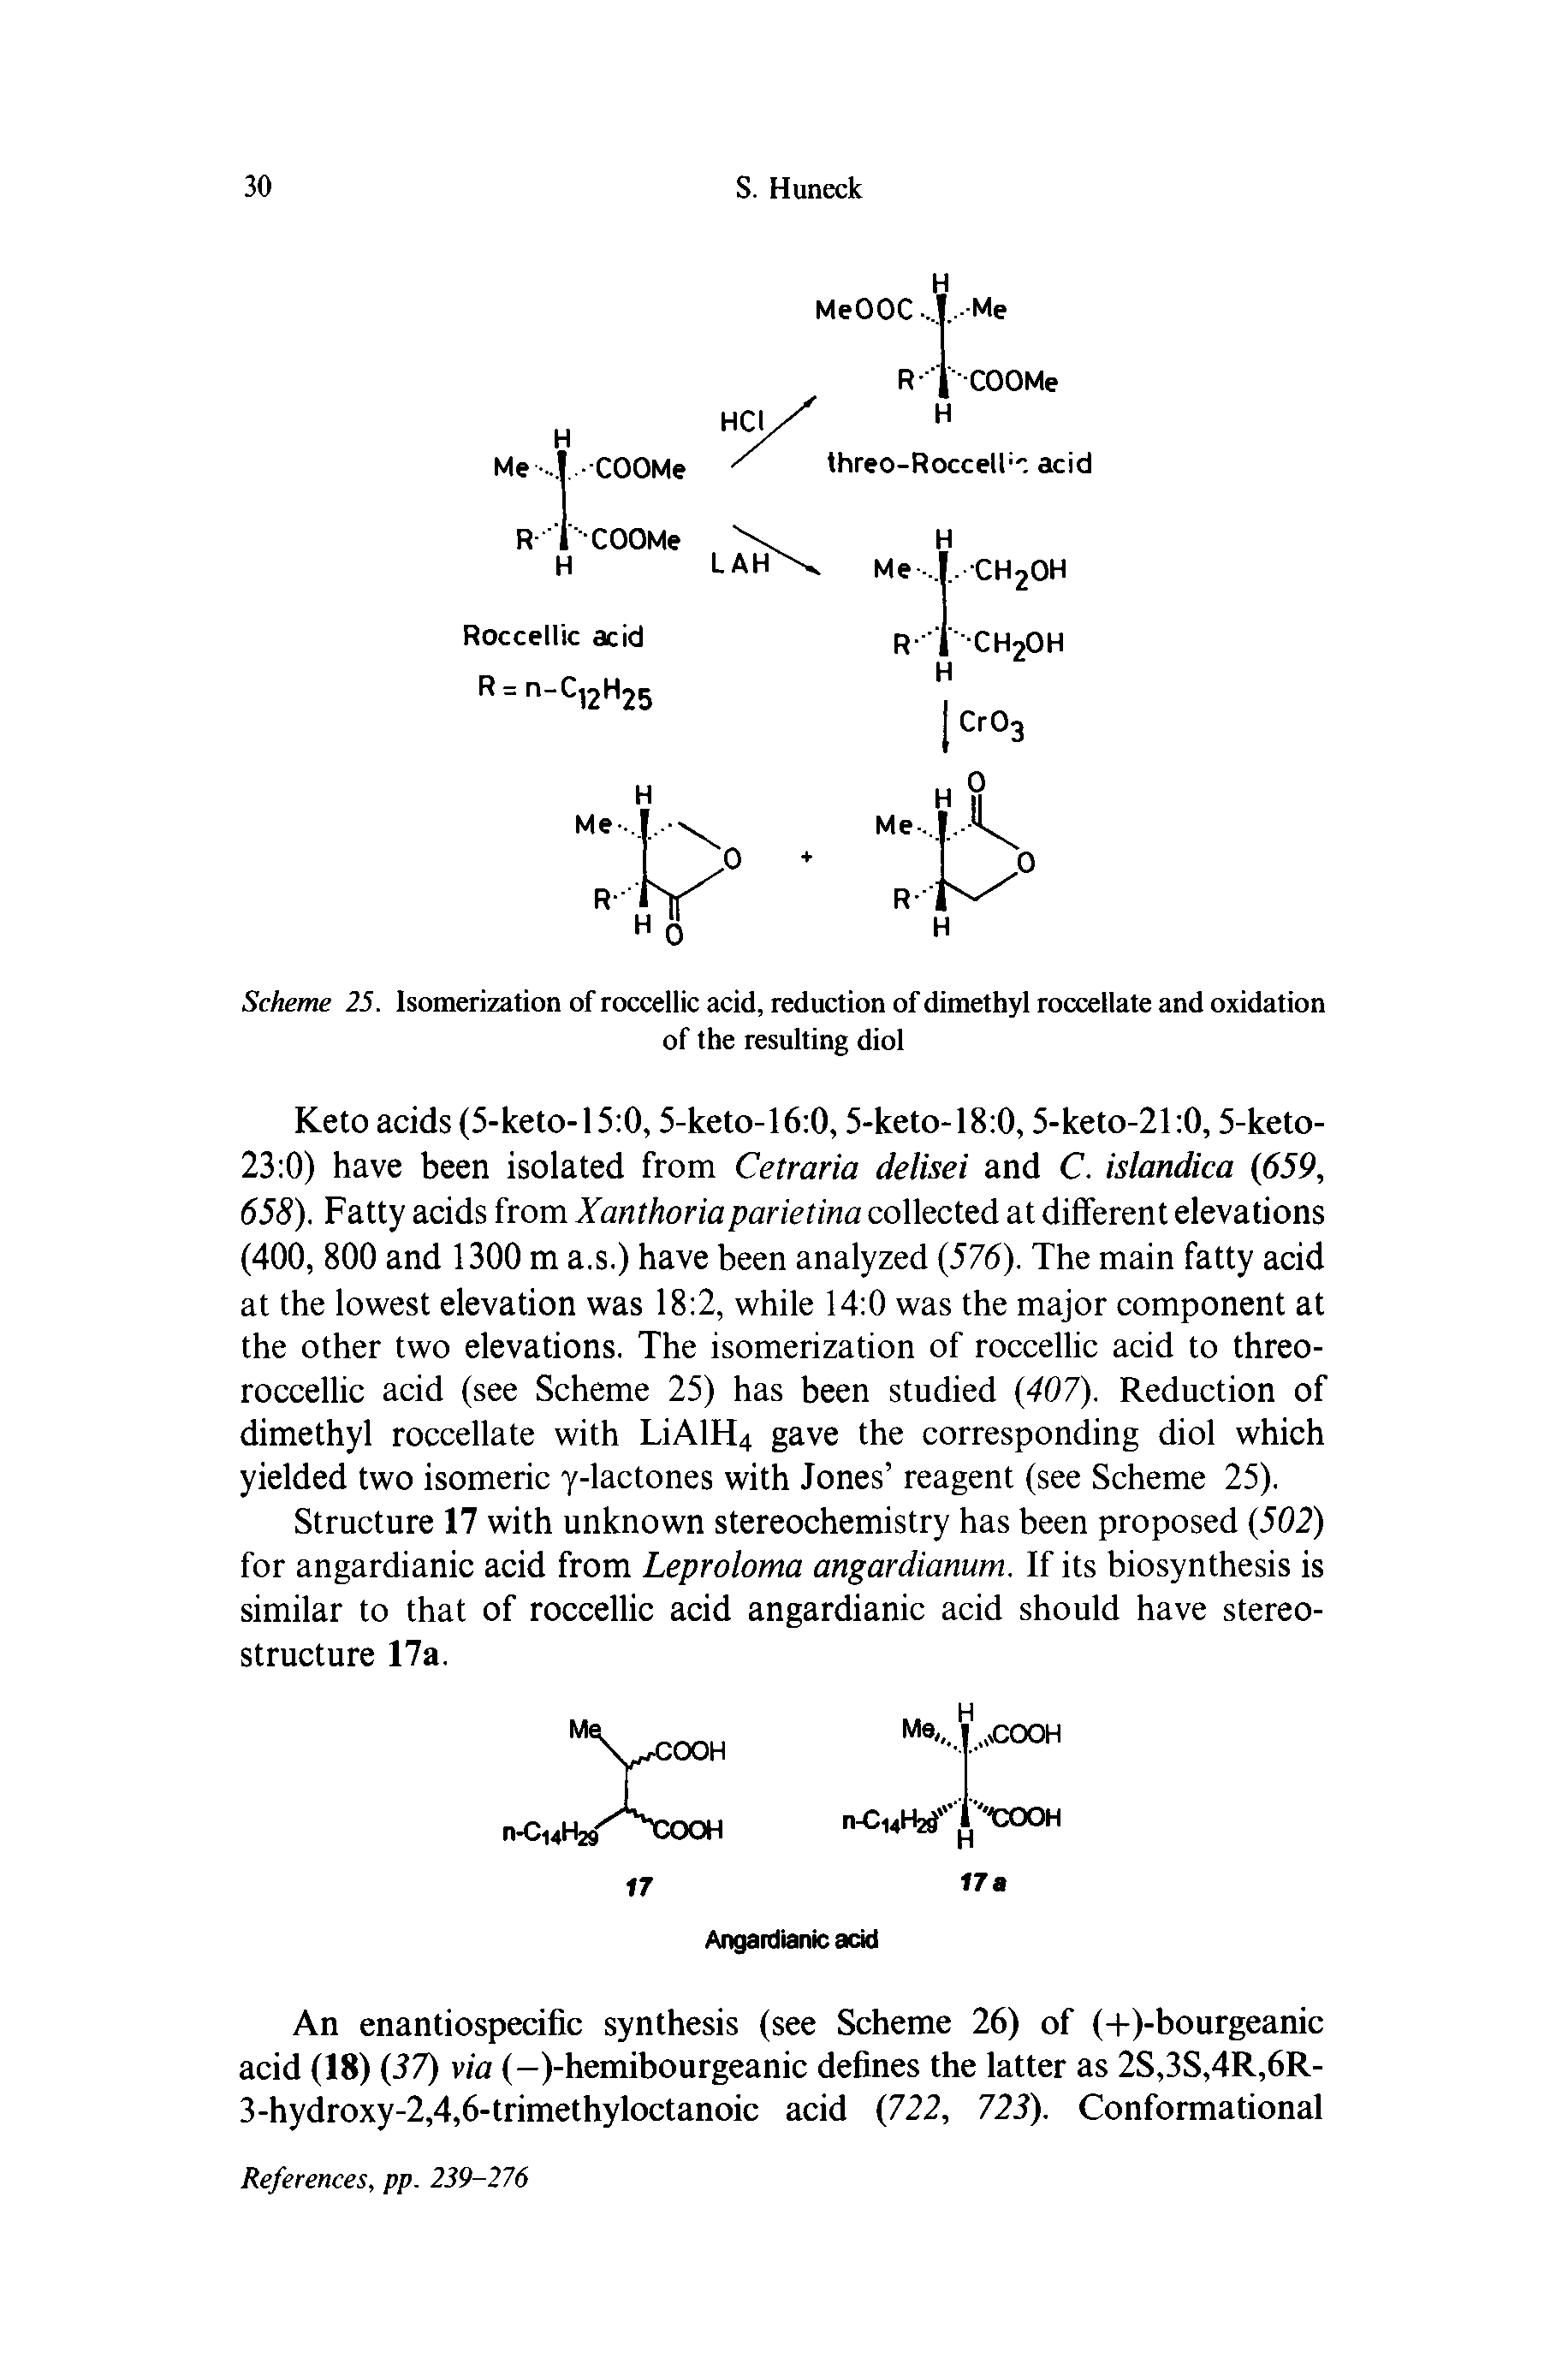 Scheme 25. Isomerization of roccellic acid, reduction of dimethyl roccellate and oxidation...